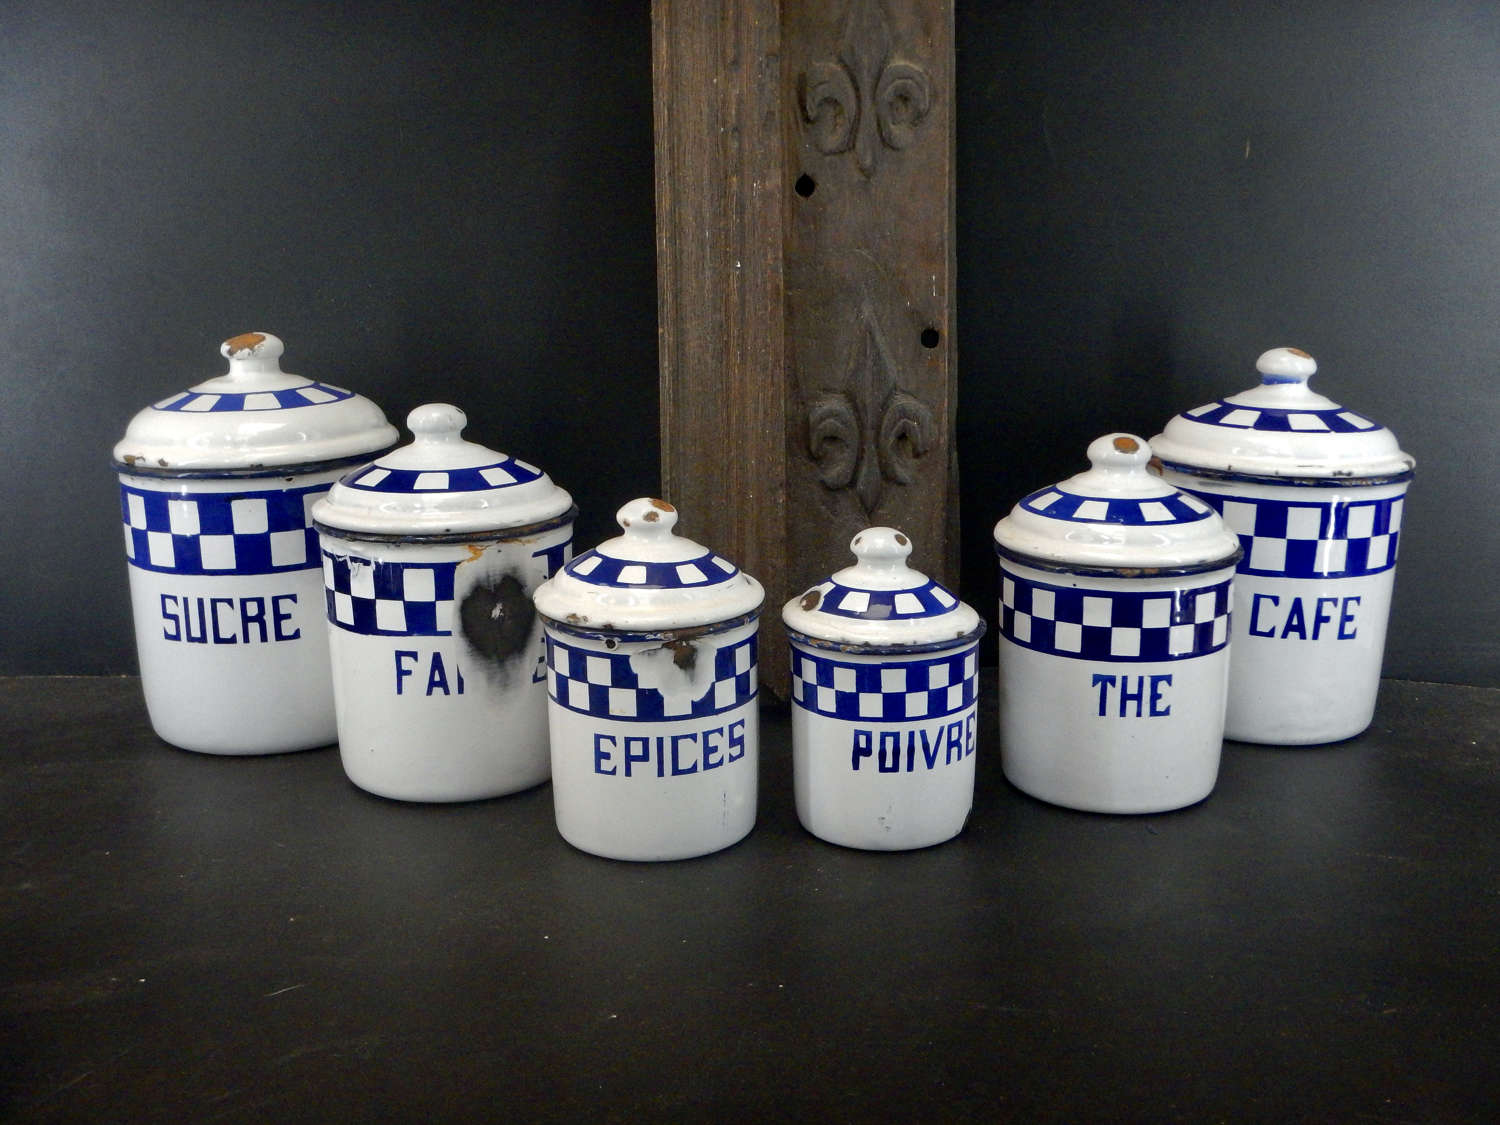 French Vintage Kitchen Canisters - Blue and White Enamel Canisters